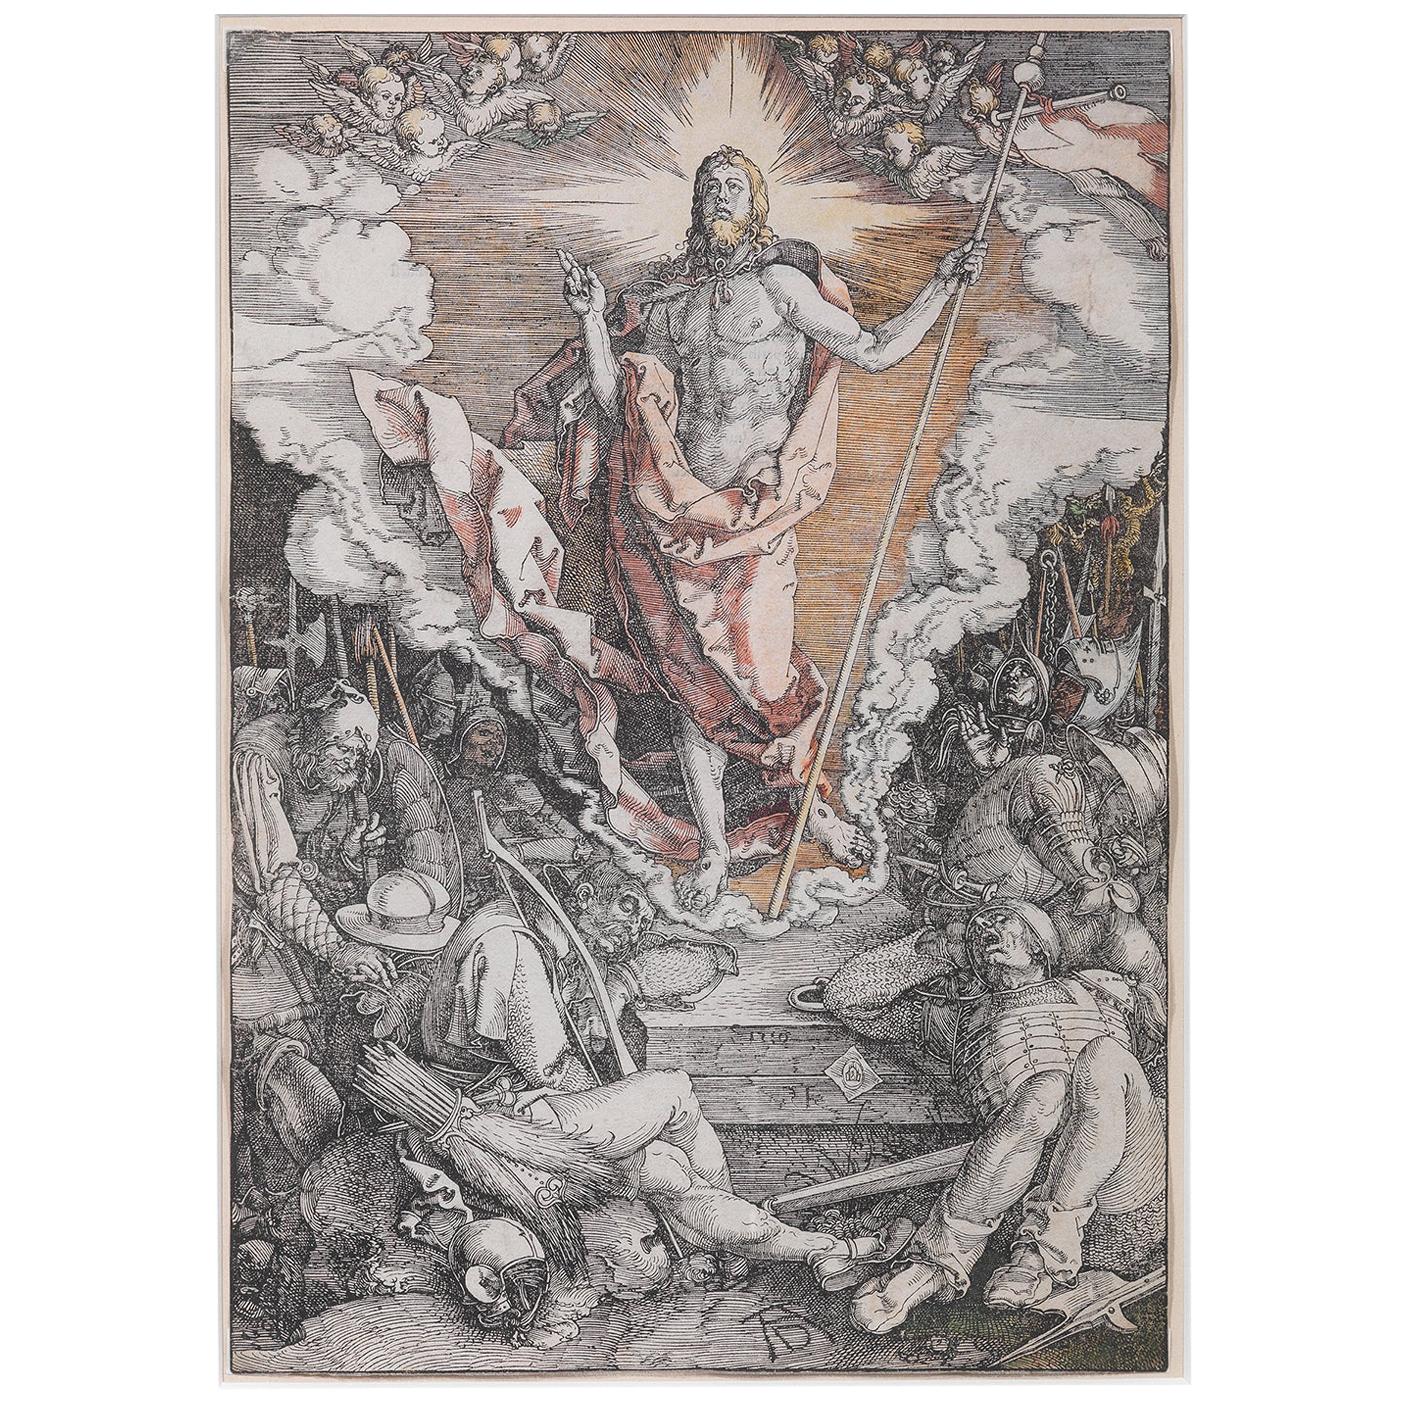 Albrecht Dürer, '1471-1528' the Resurrection, from the Large Passion